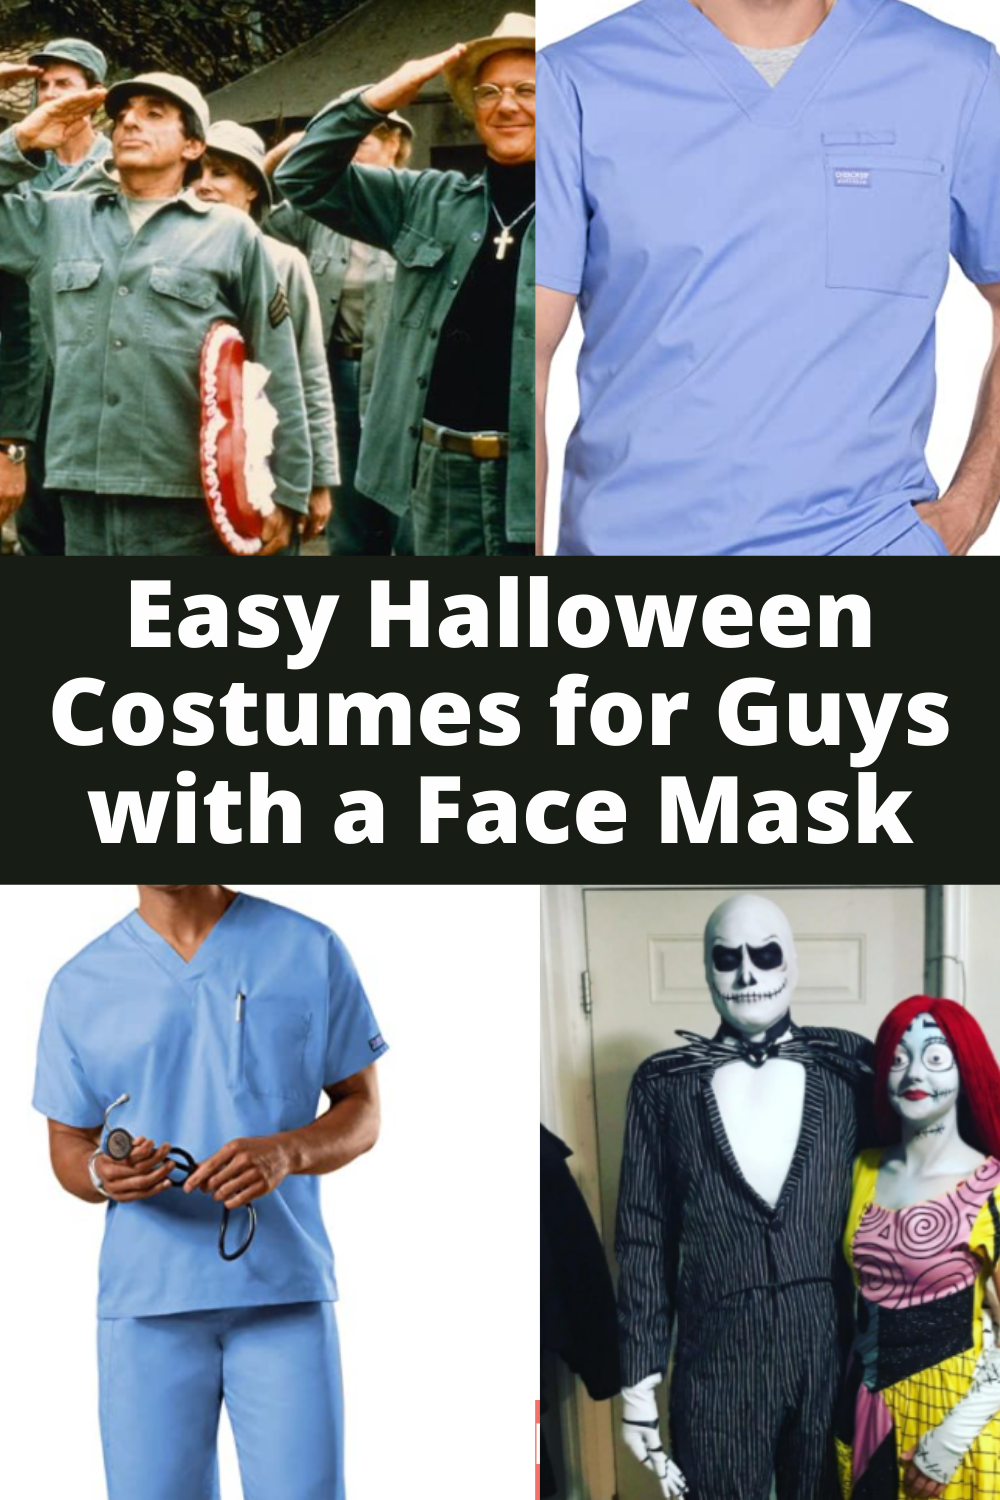 Last Minute DIY Costumes for Guys with Face Masks -   16 diy Halloween Costumes for guys ideas